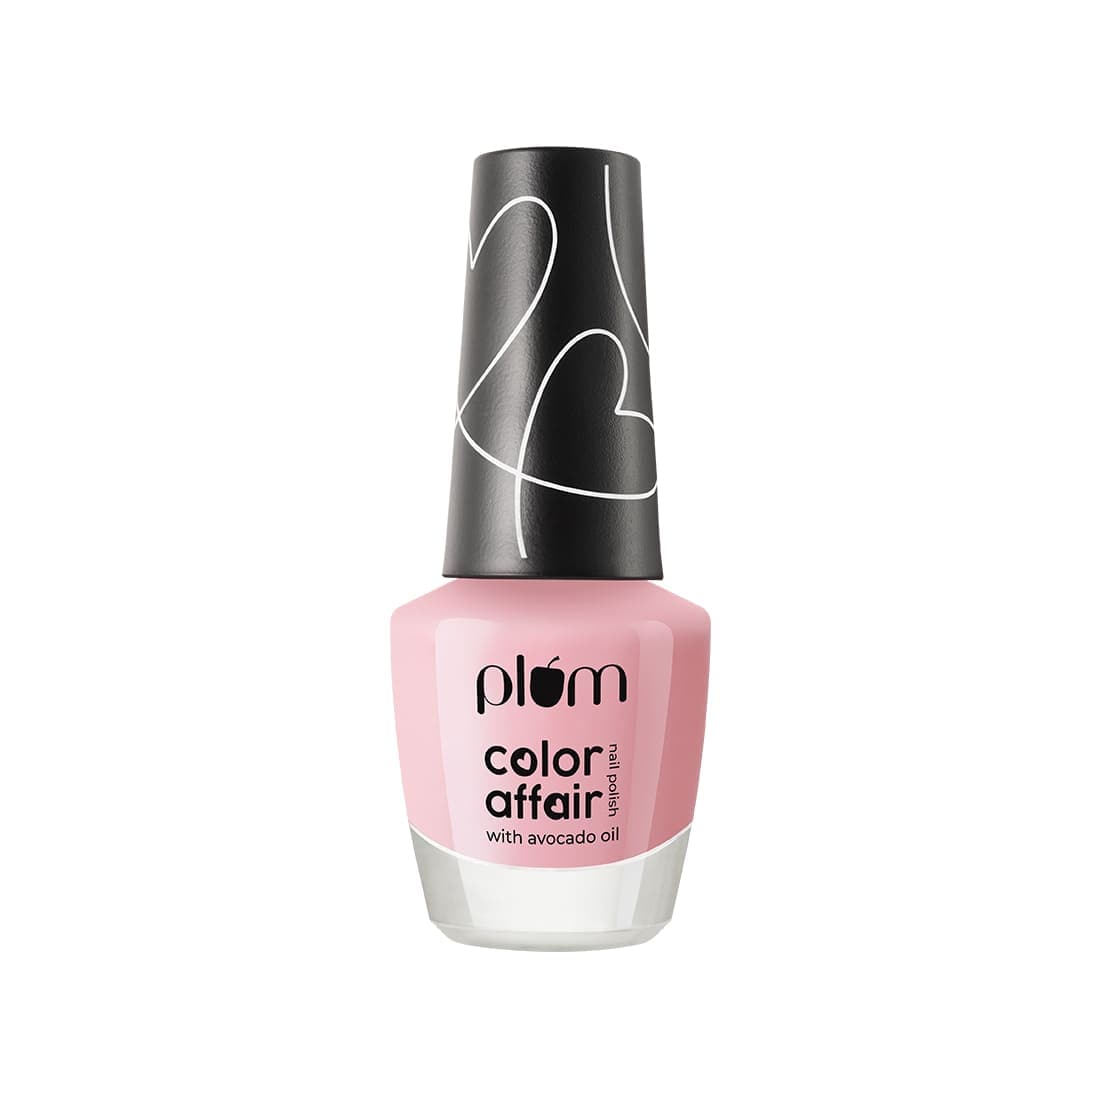 Buy Nail Polish Lacquer 42 Onion Online at Low Prices in India - Amazon.in